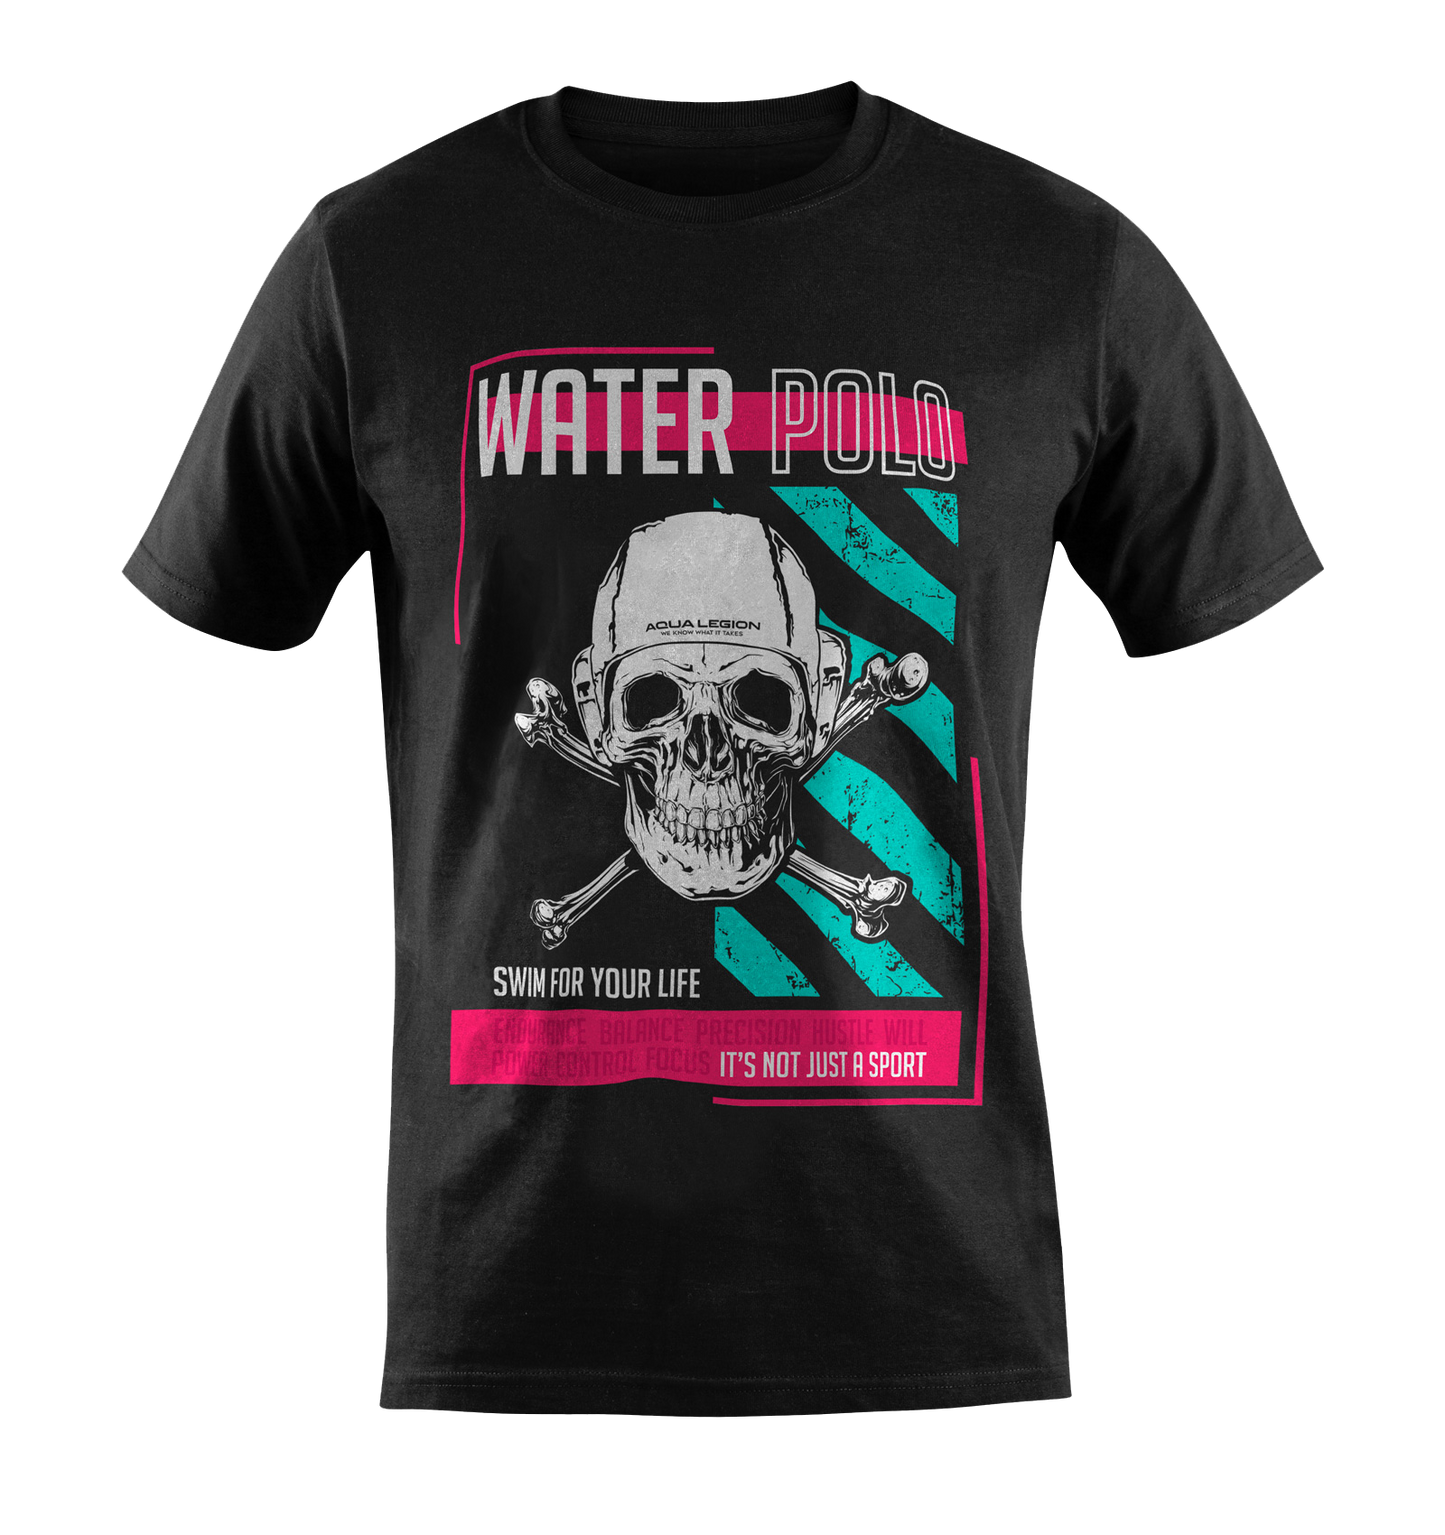 Swim for your life - Black Male t-shirt